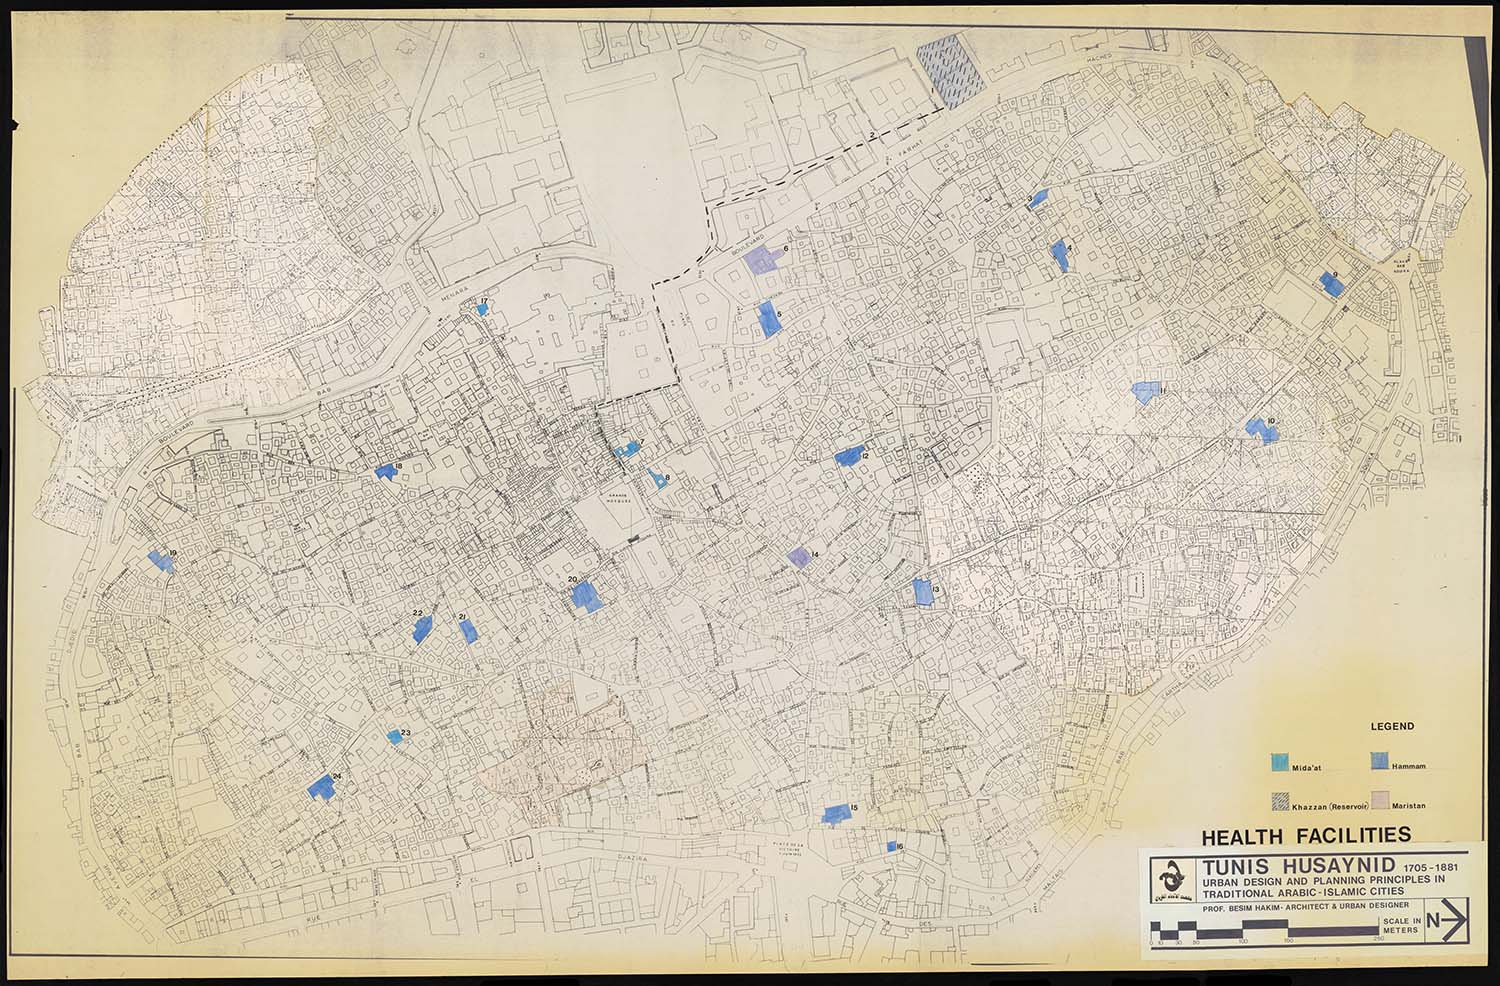 Tunis  - Map of historic center of Tunis showing locations of health facilities, including sanitation and water supply. The locations of maristans (hospitals), are indicated in pink, and khazzan (reservoirs), mida'at (ablution fountains), and hammams (baths) in blue. Scale: 1:1,000 m. This map is part of a&nbsp;<a href="https://archnet.org/collections/1762" target="_blank" data-bypass="true">series of maps</a><span style="text-align: justify;">&nbsp;titled "Tunis Husaynid (1705-1881): Urban Design and Planning Principles in Traditional Arabic-Islamic Cities." Produced by Besim S. Hakim.</span>